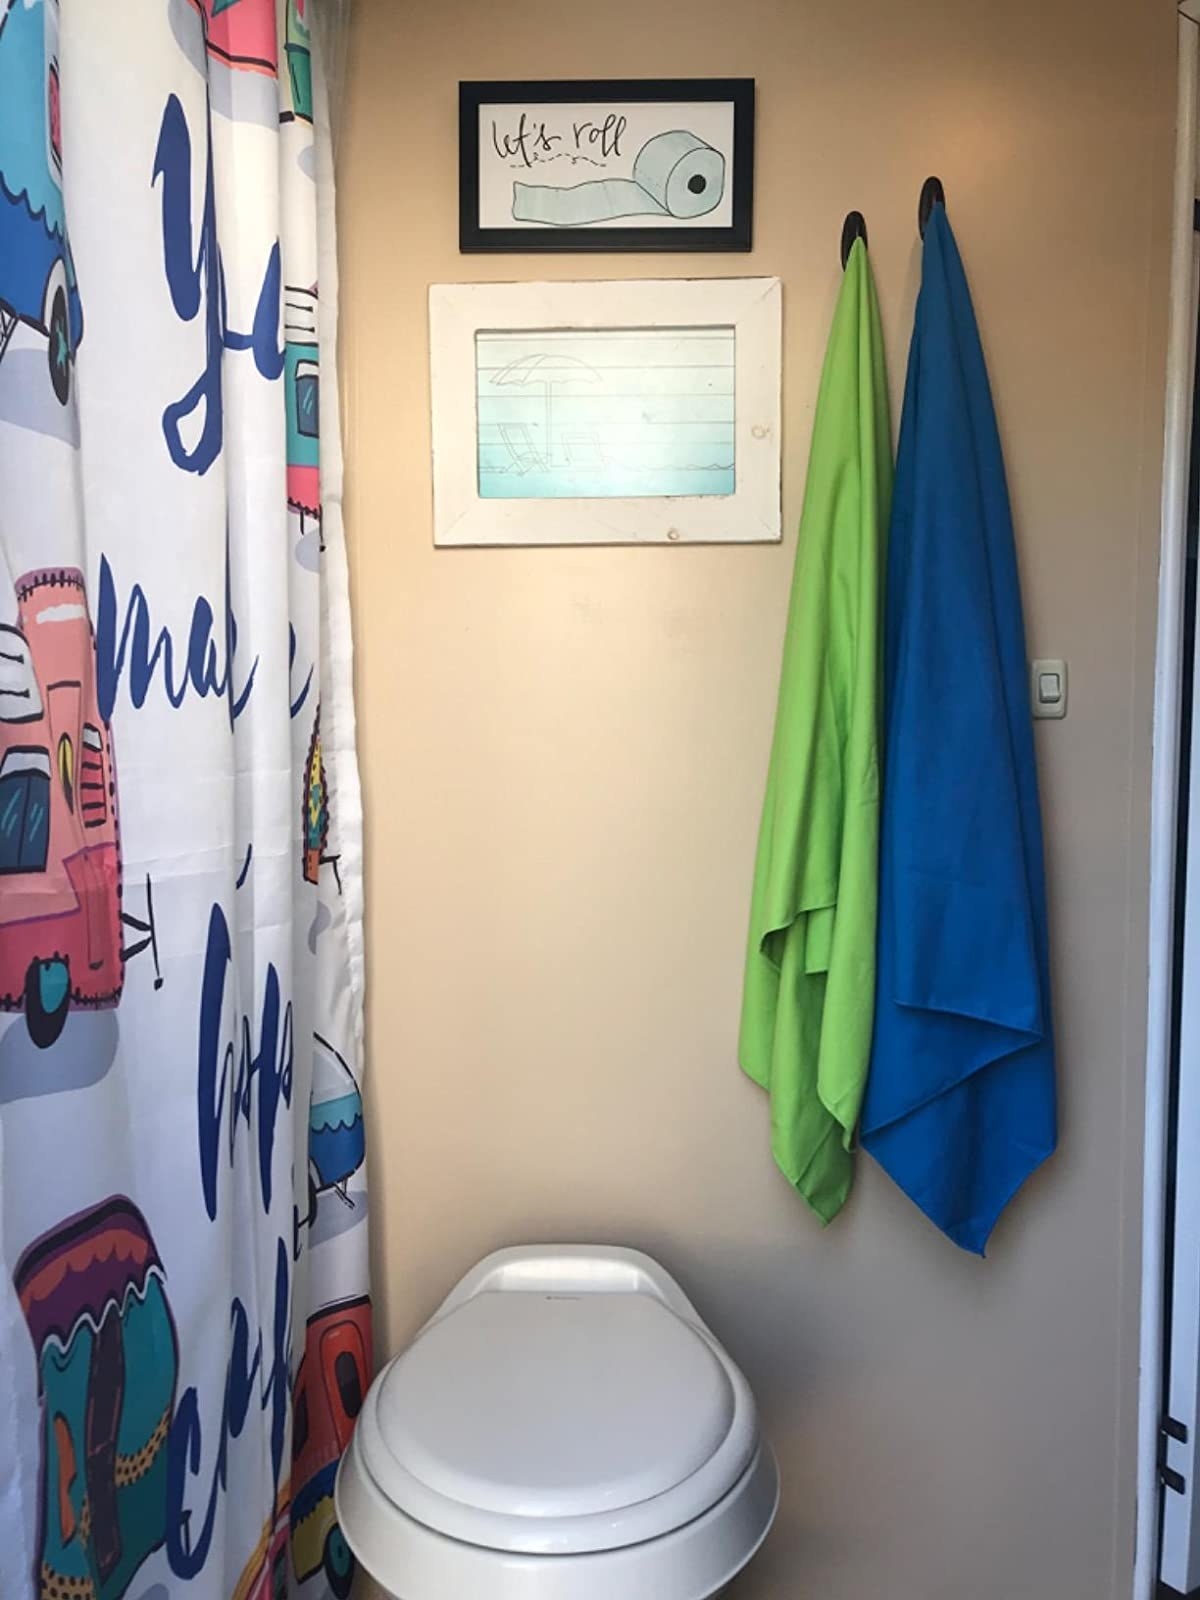 The green and blue towels in a bathroom